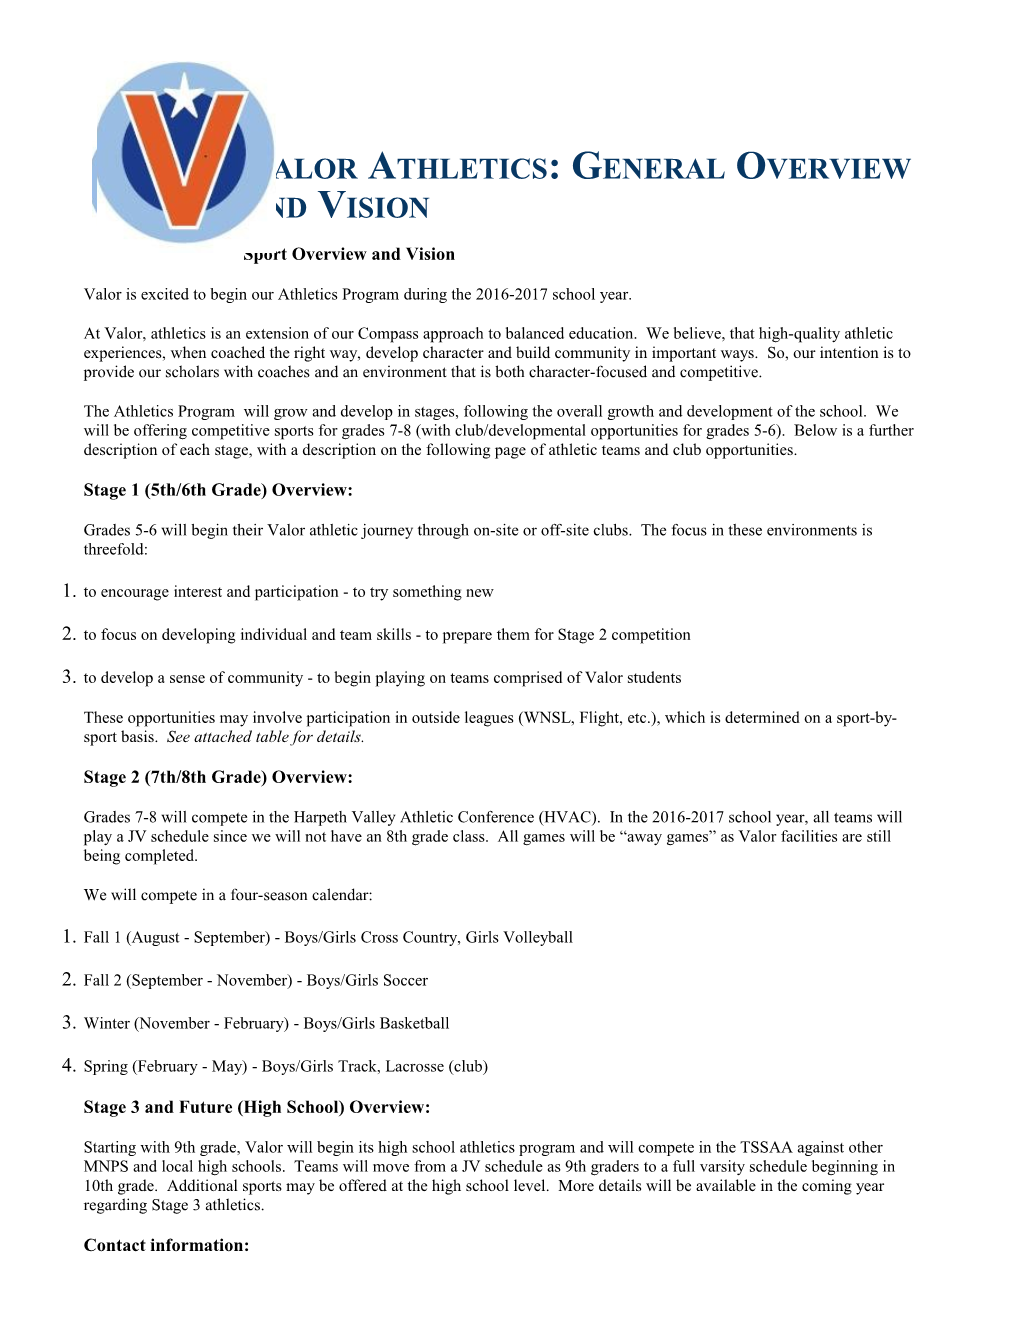 Valor Athletics: General Overview and Vision